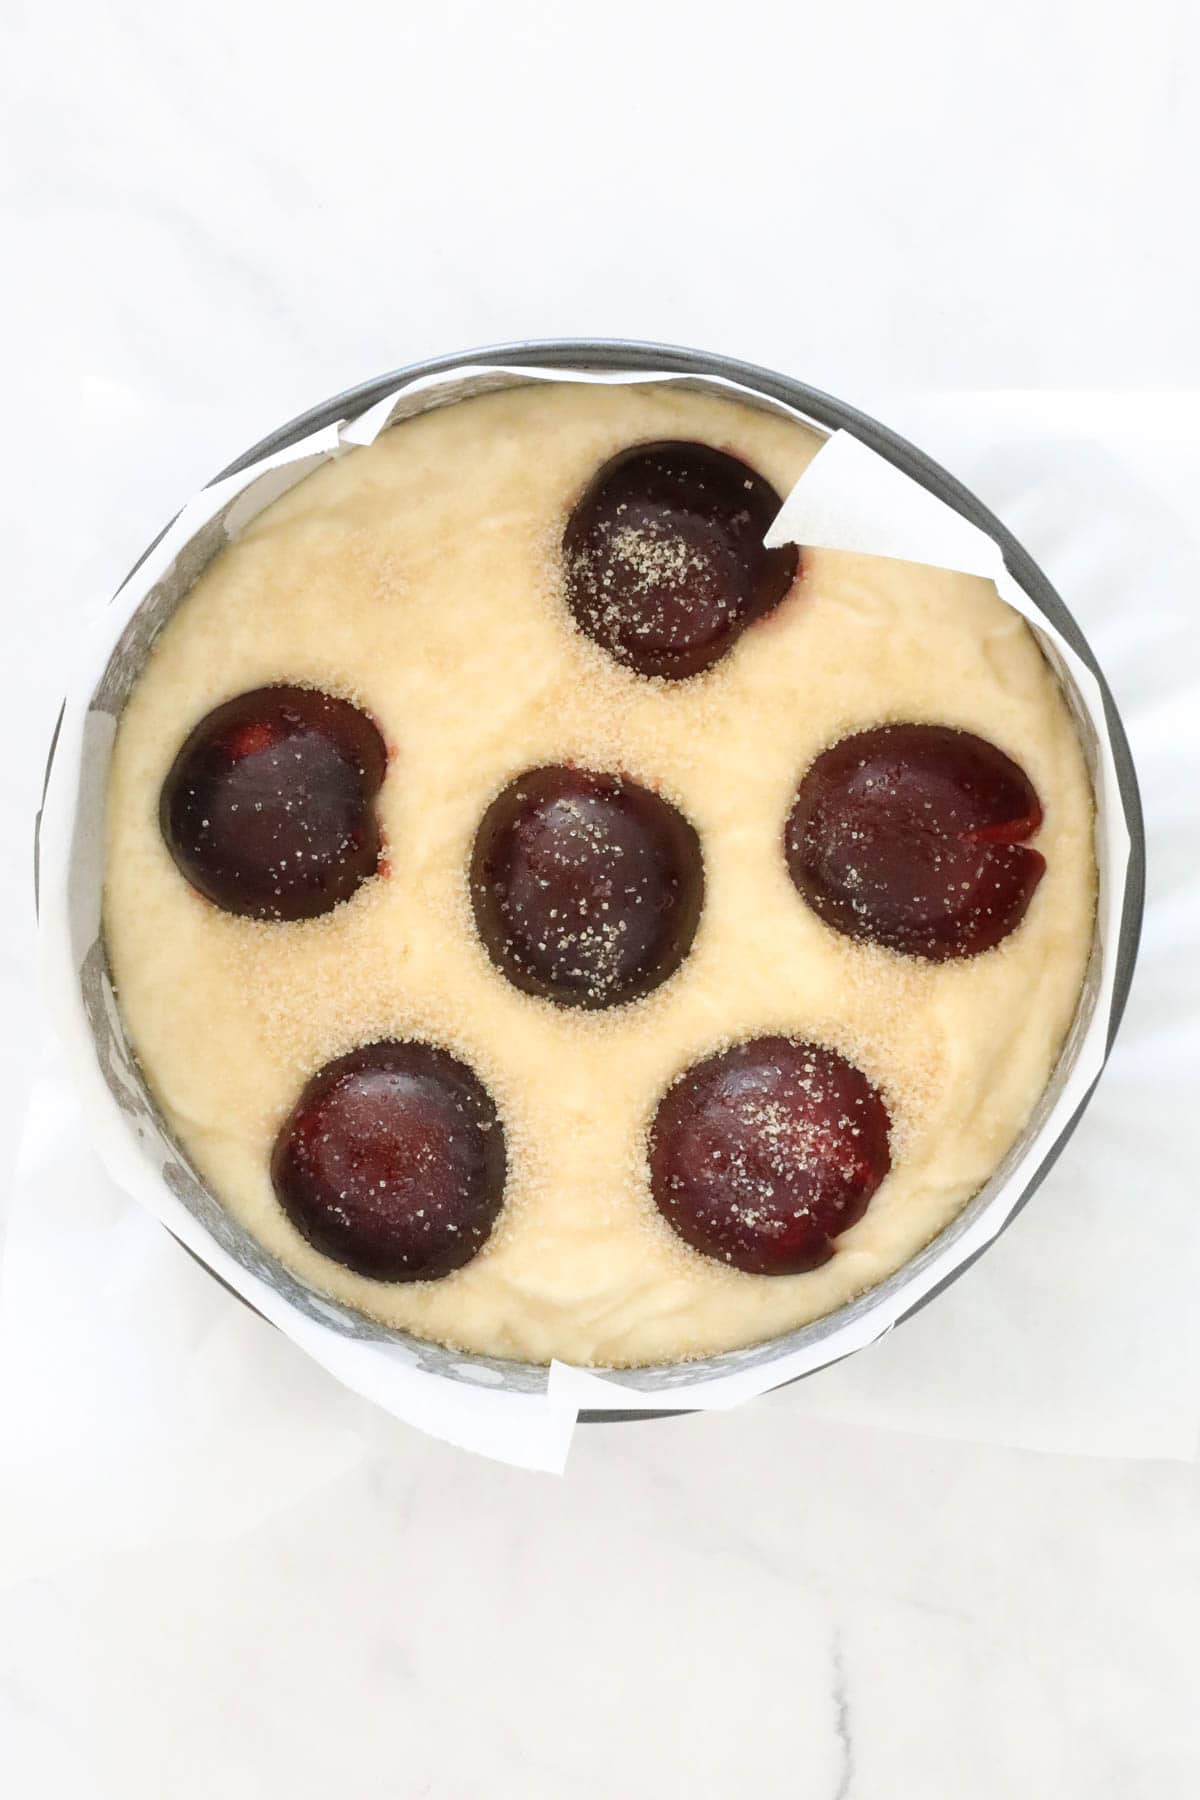 The cake batter poured into the lined cake tin, and plum halves placed on top of the batter.